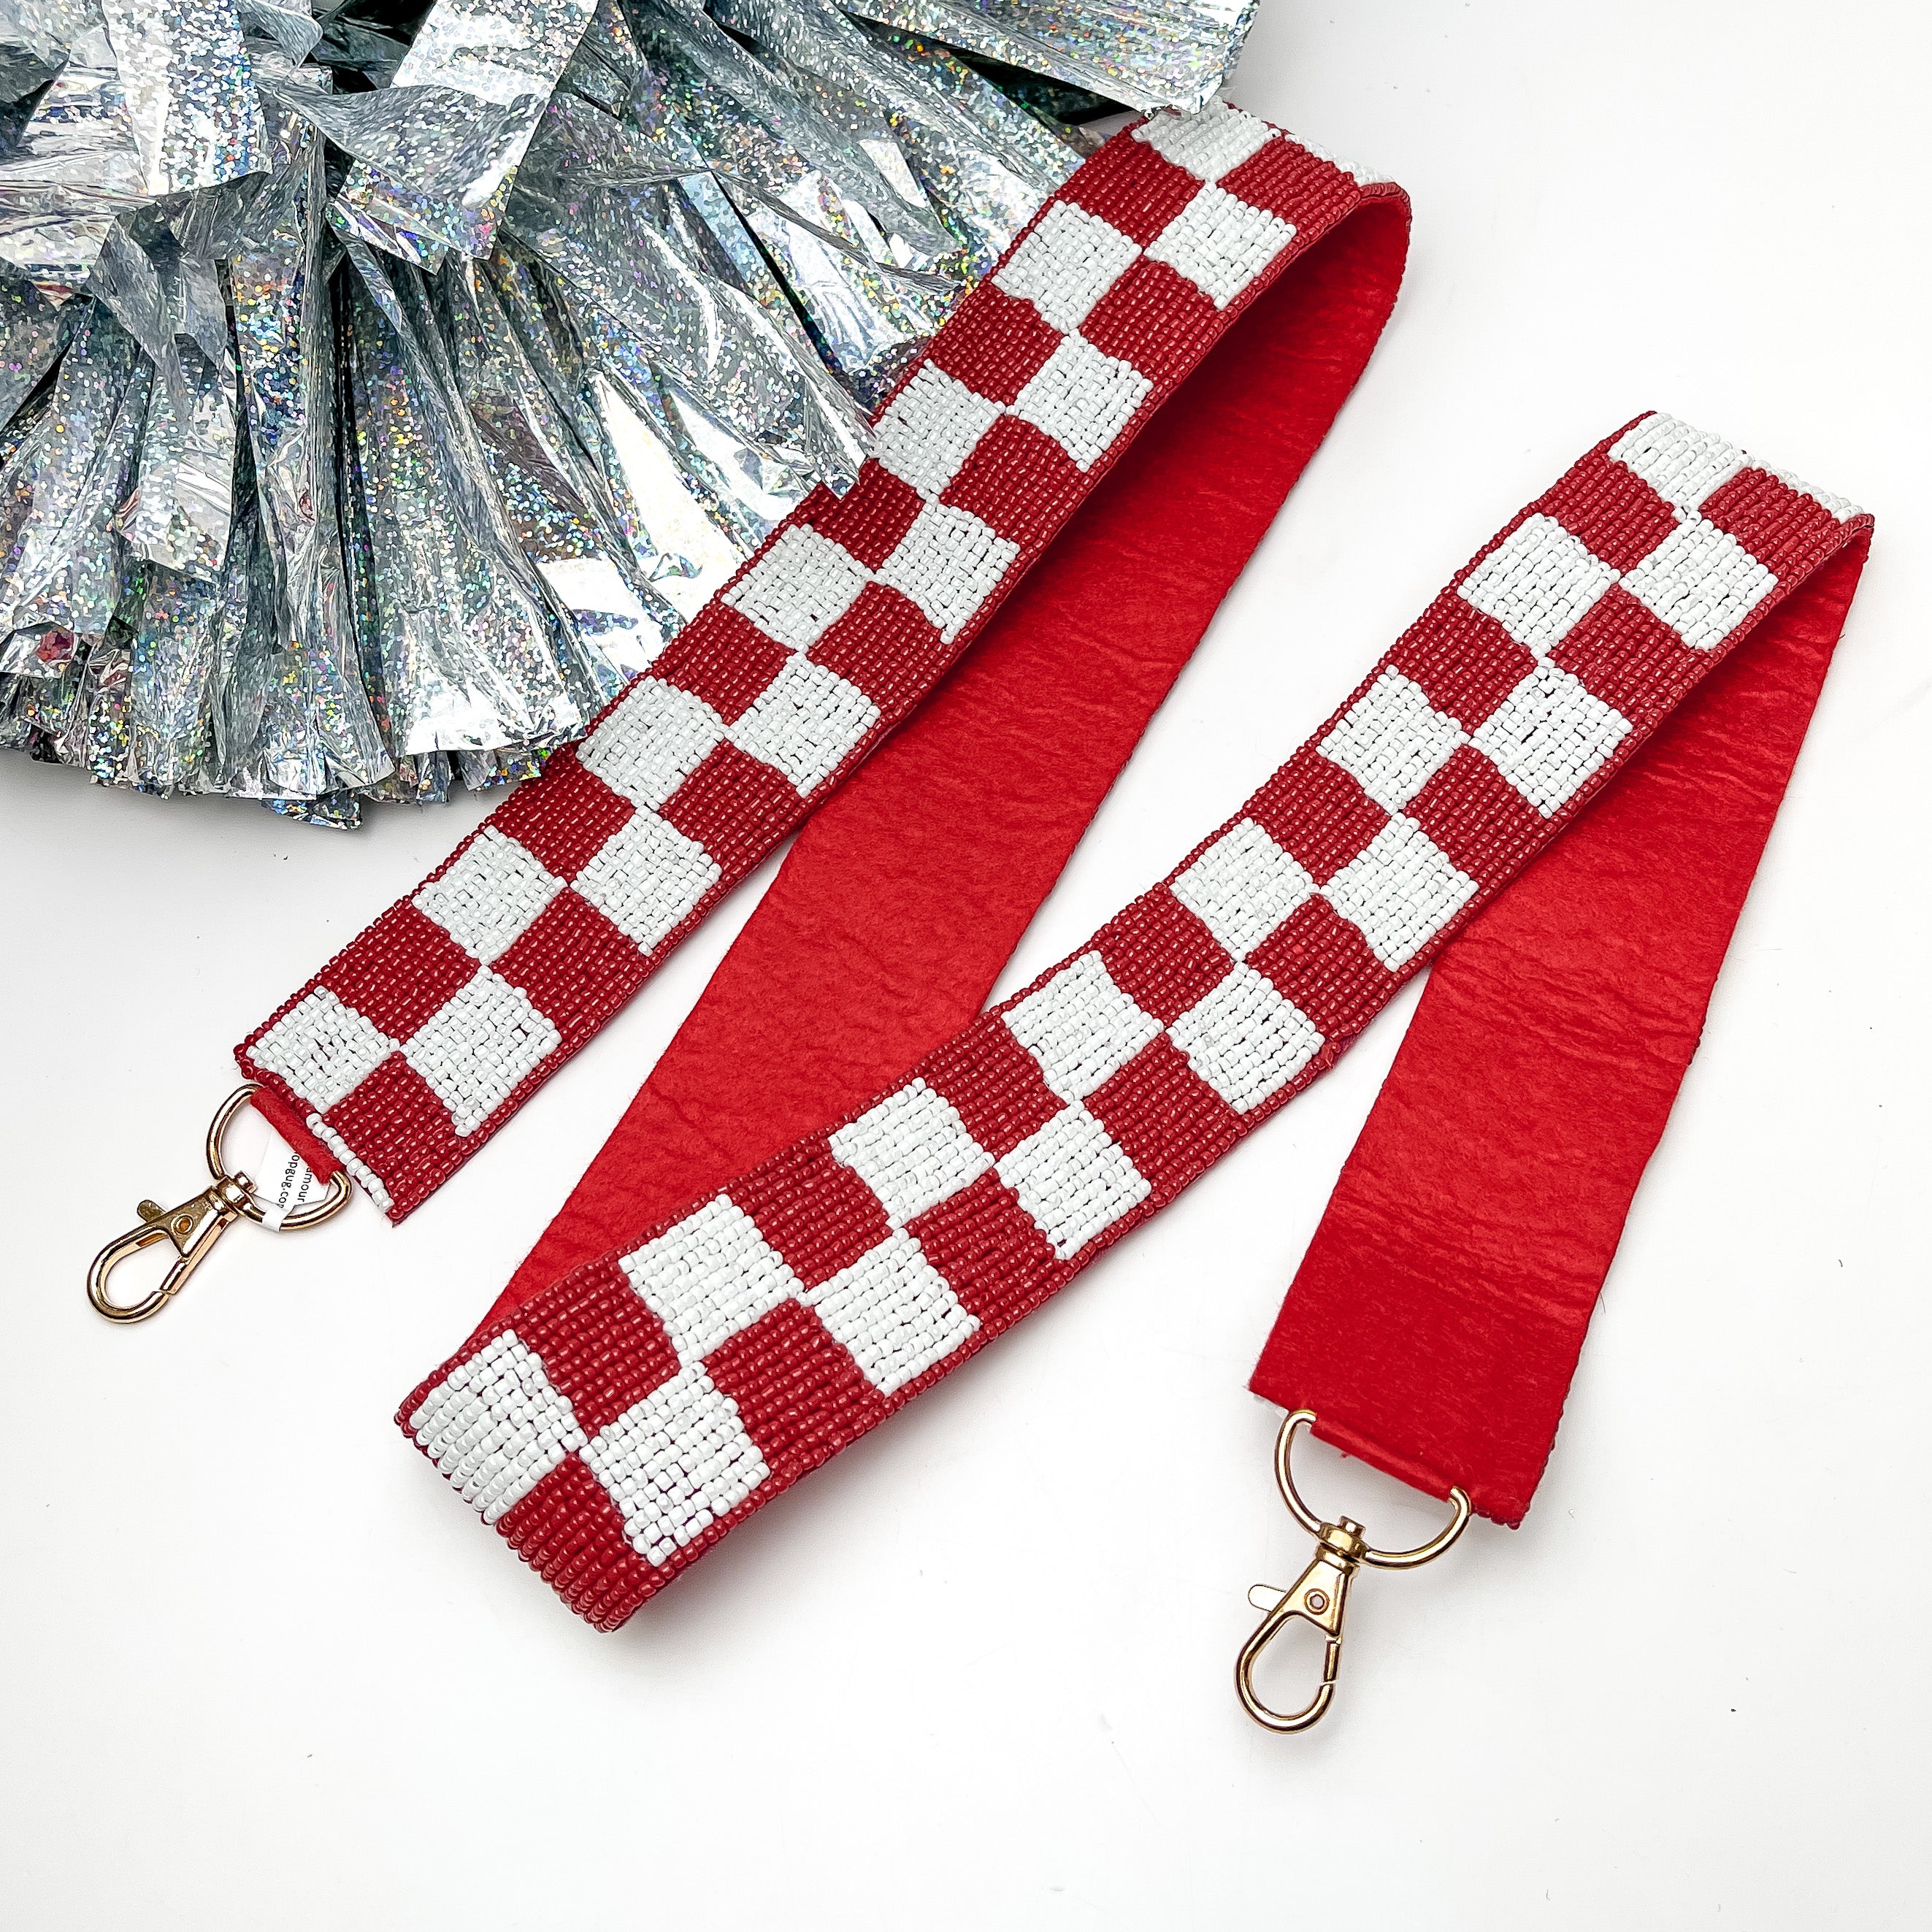 Game Day! Checkered Beaded Purse Strap in Red and White. This purse strap is pictured on a white background with a silver pom pom next to it.